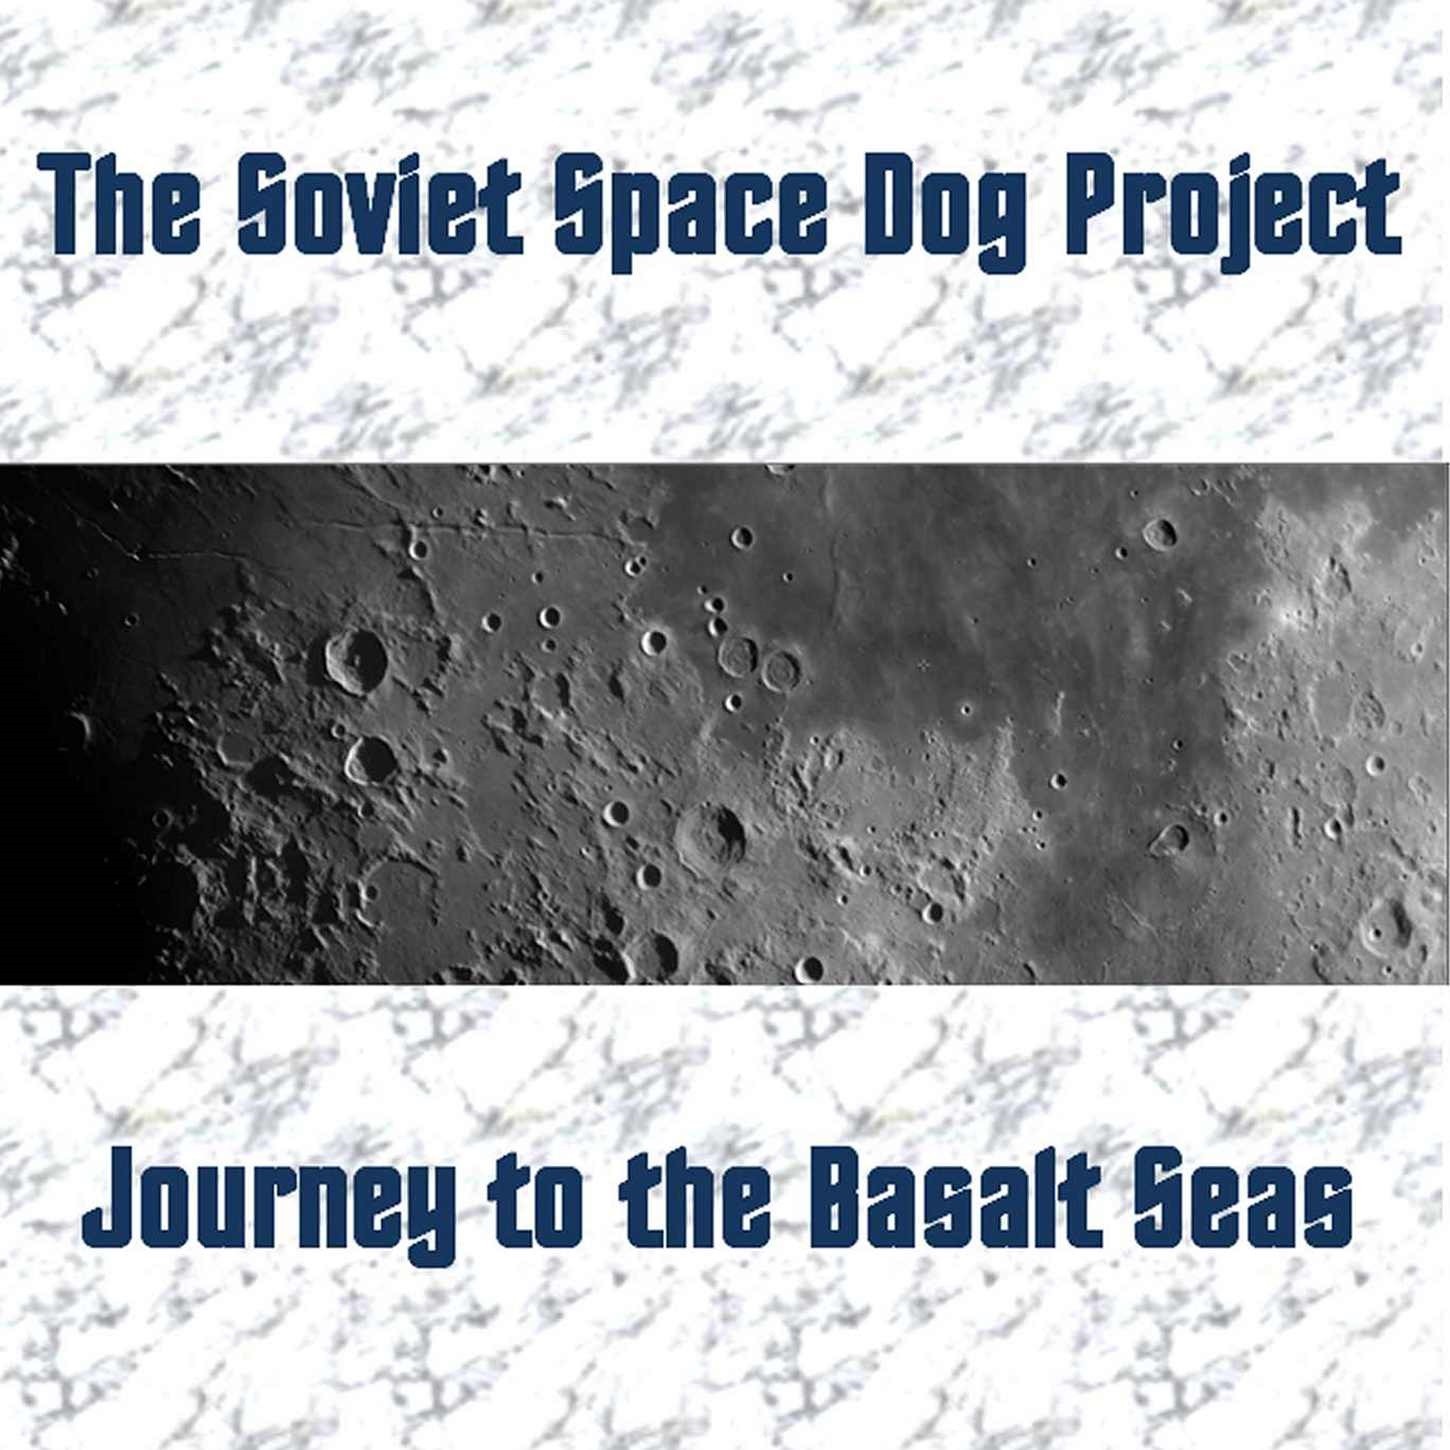 The Soviet Space Dog Project - Journey to the Basalt Seas (2019) [FLAC 24bit/44,1kHz]